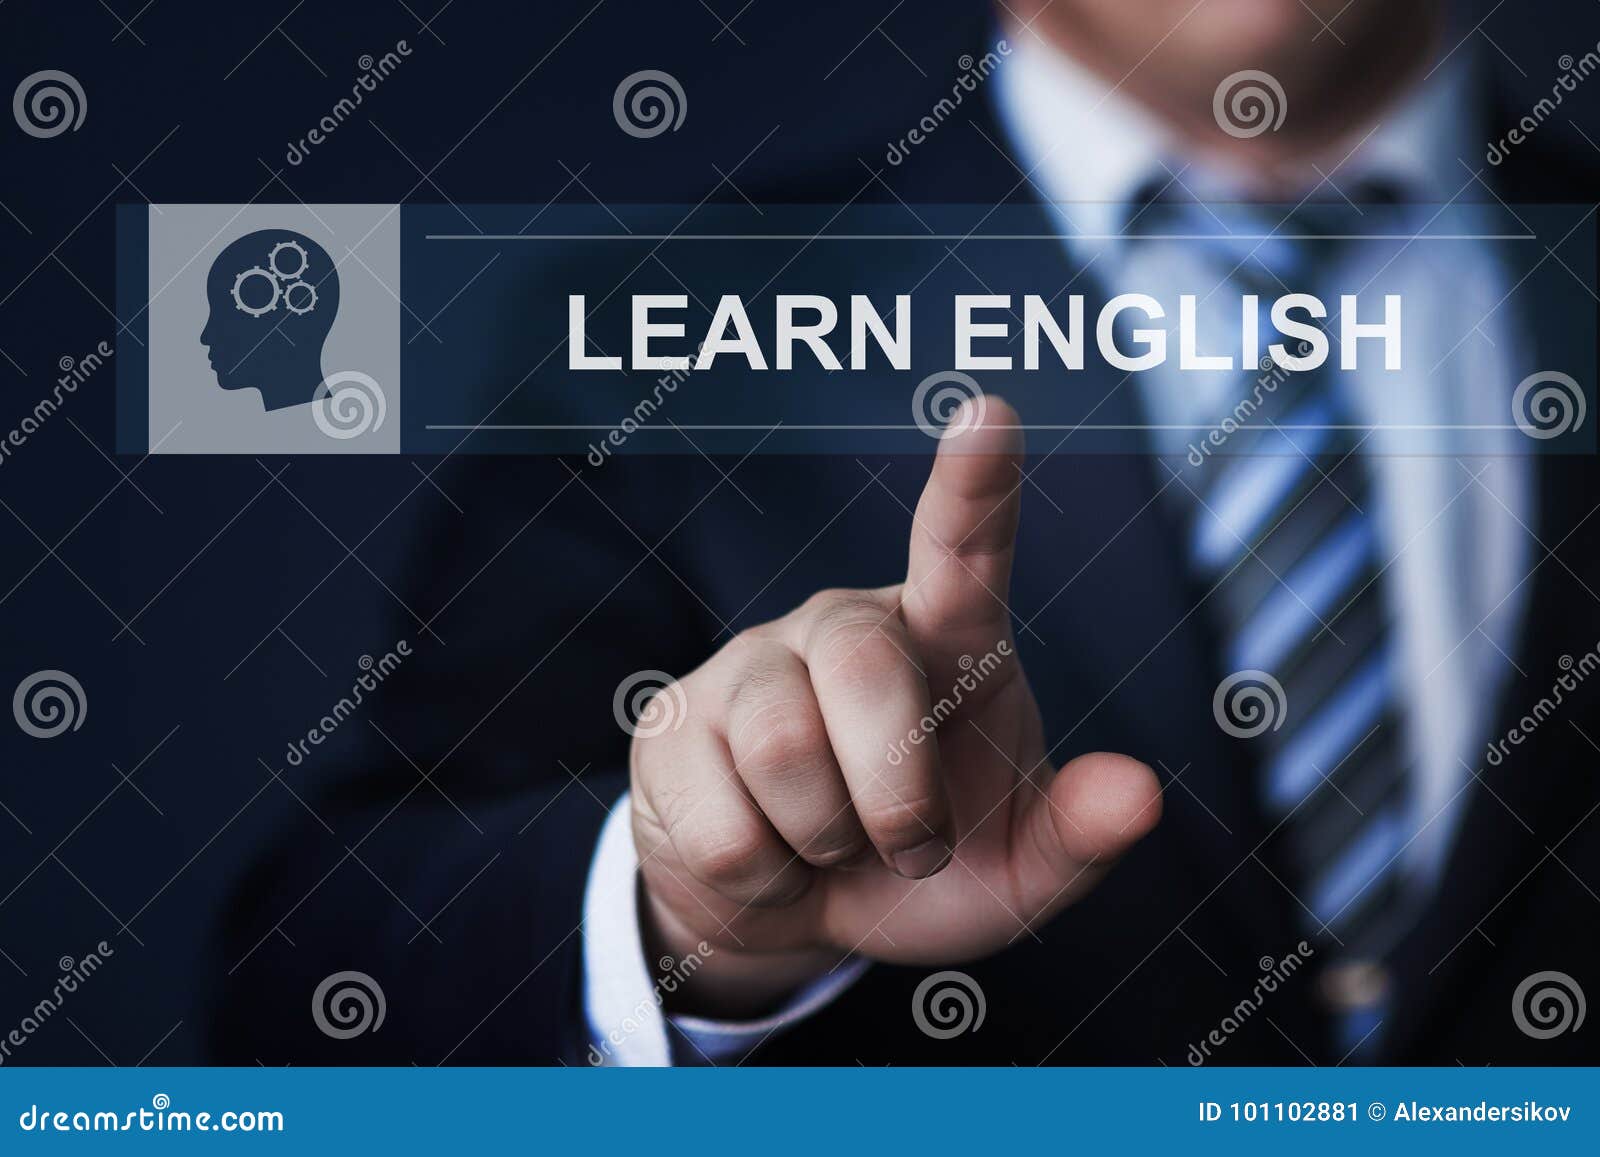 learn english online education knowledge business internet technology concept